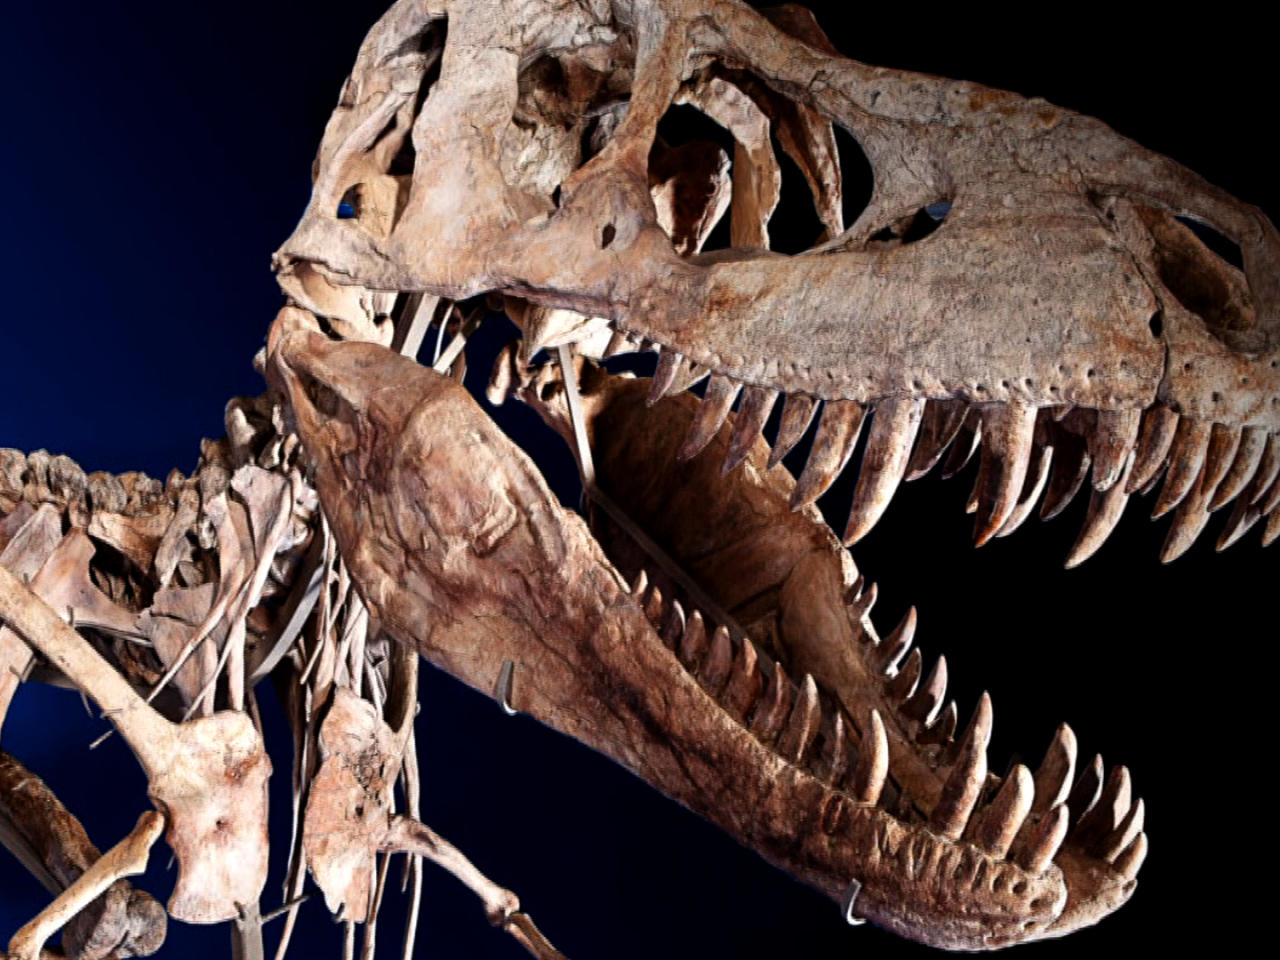 T. rex could pulverize bones with astonishing force - CBS News